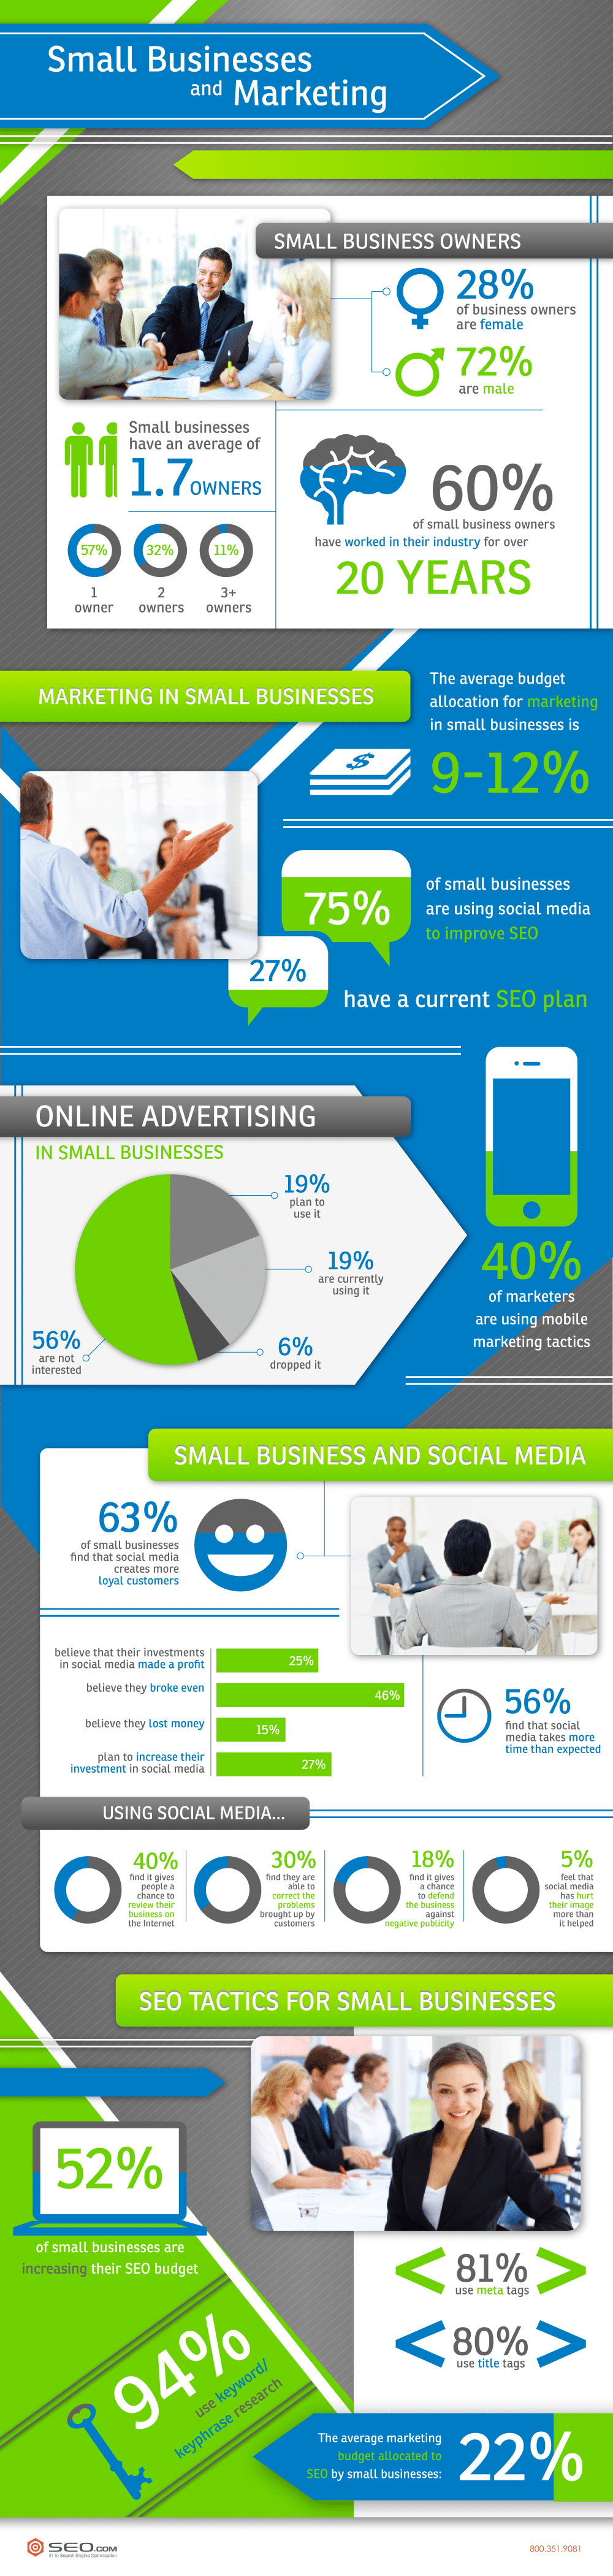 small business and marketing infographic